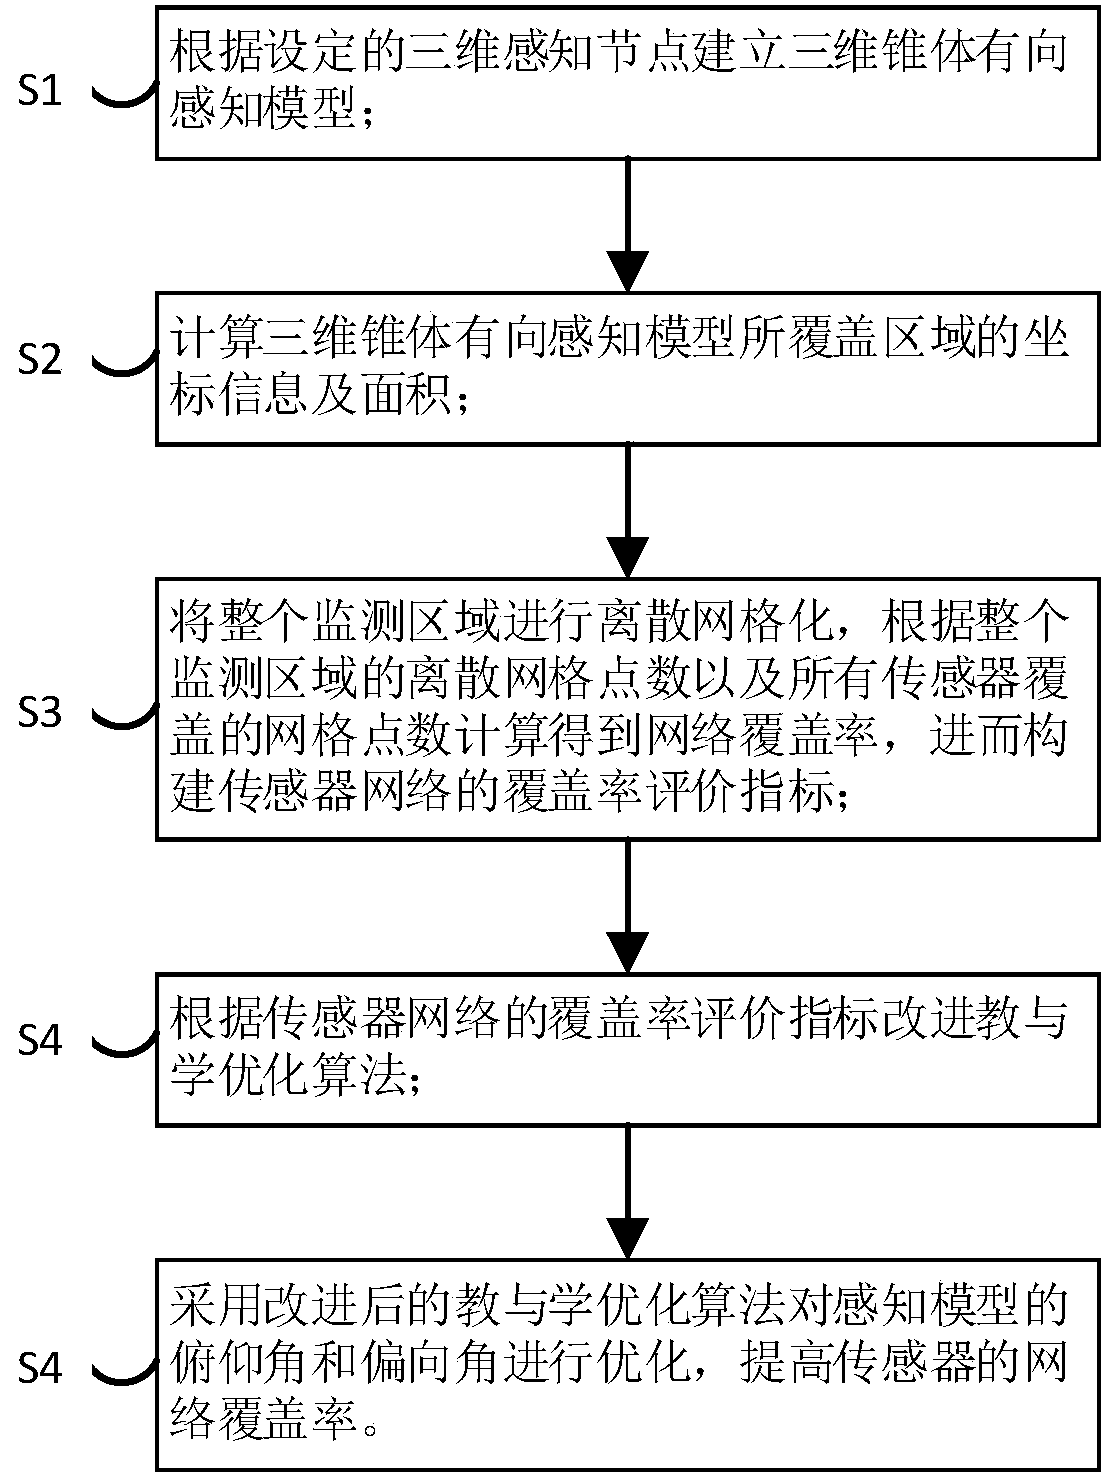 Sensor network coverage control method and sensor network coverage control system based on three-dimensional directed perception model